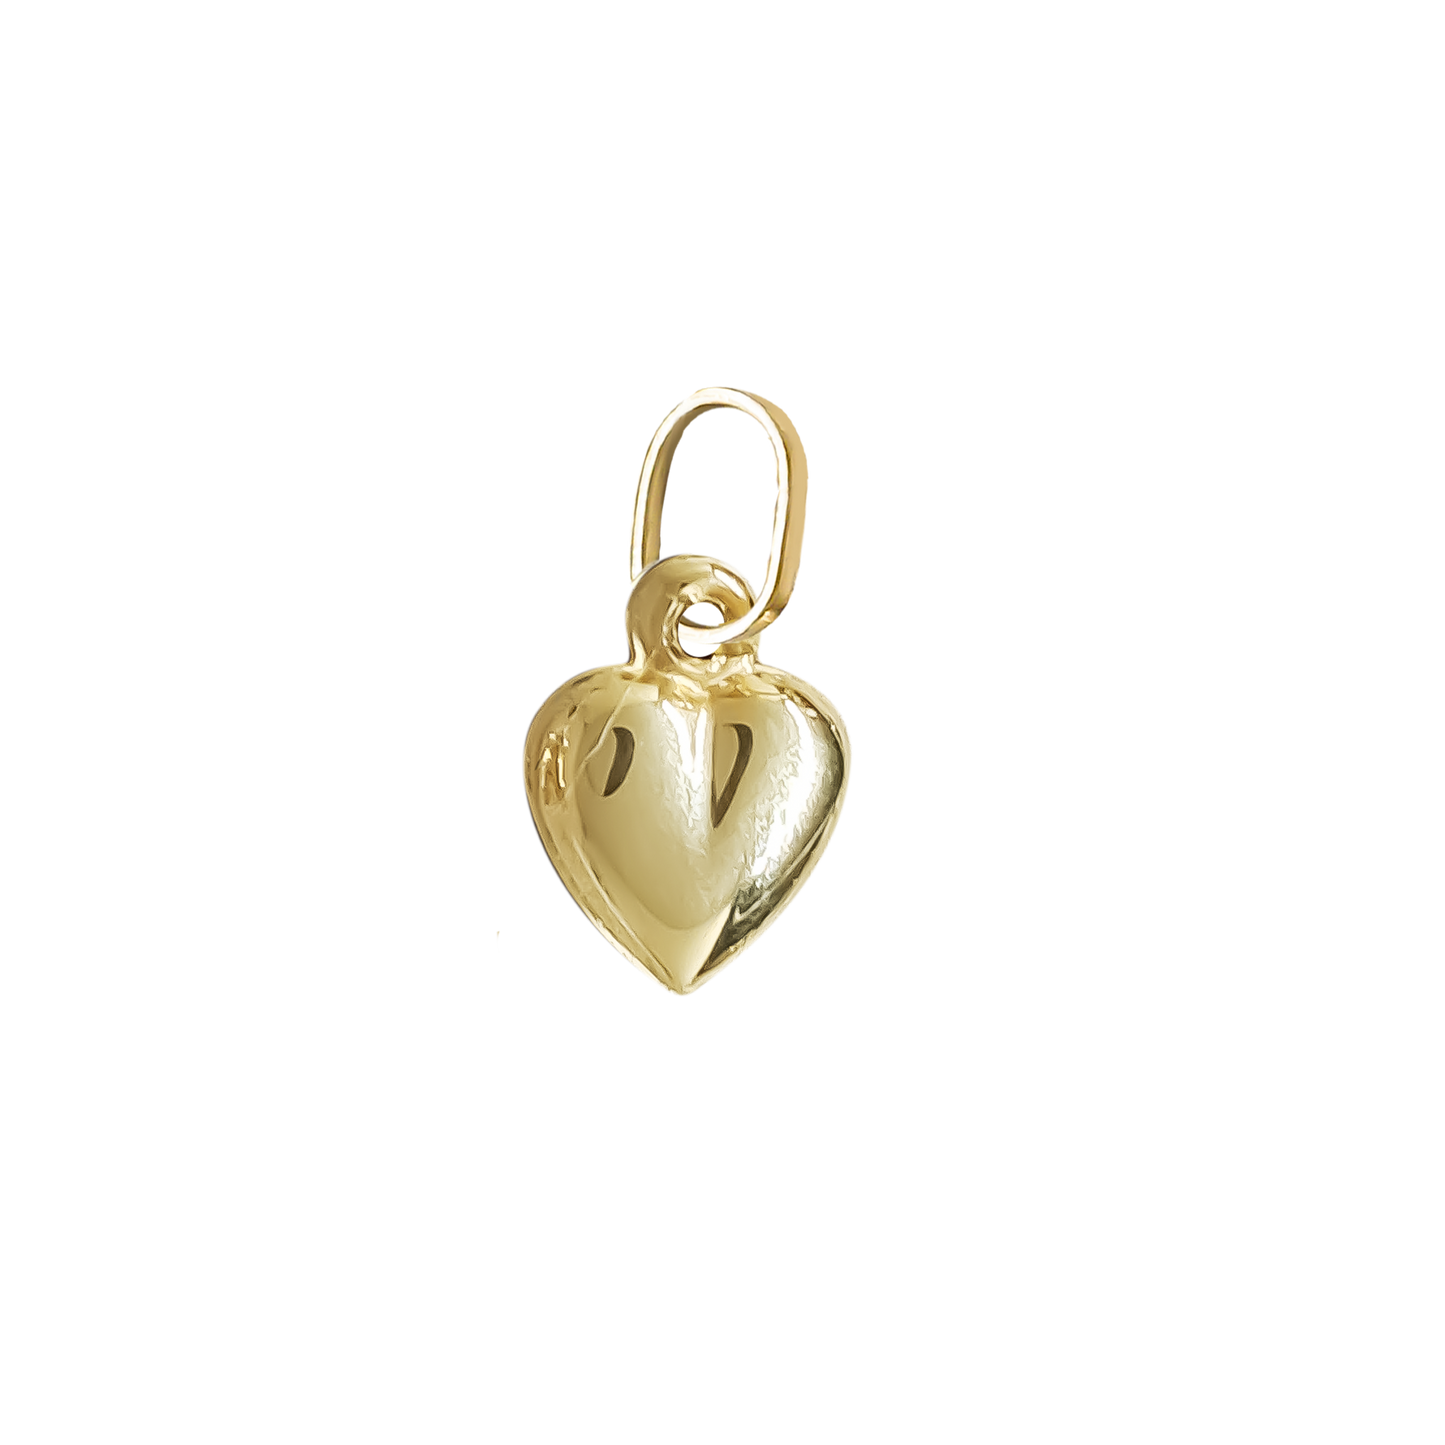 8mm Rounded Heart Charm 9ct Yellow Gold